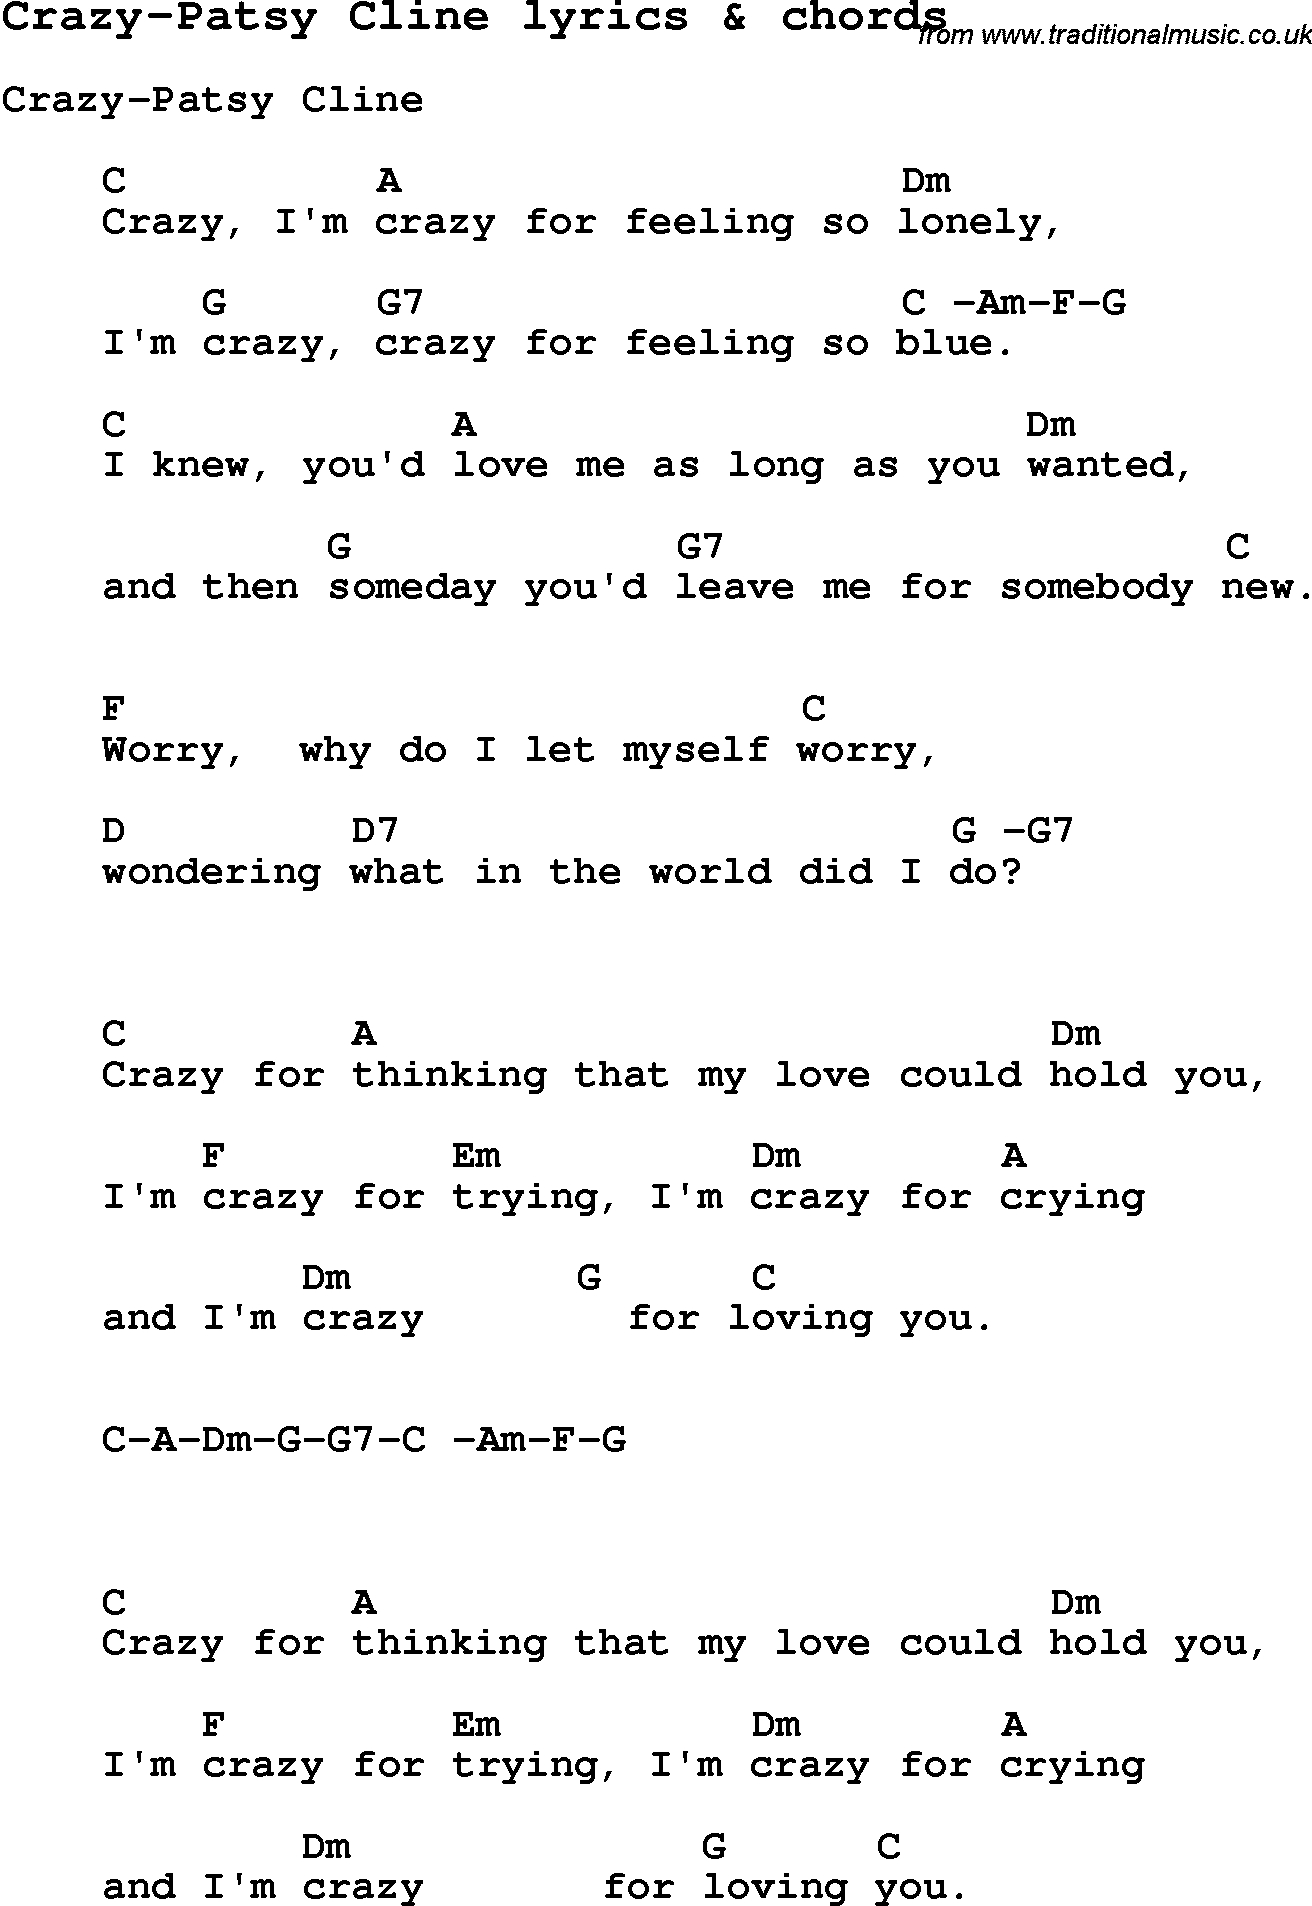 Love Song Lyrics For: Crazy-Patsy Cline With Chords For Ukulele - Free Printable Song Lyrics With Guitar Chords